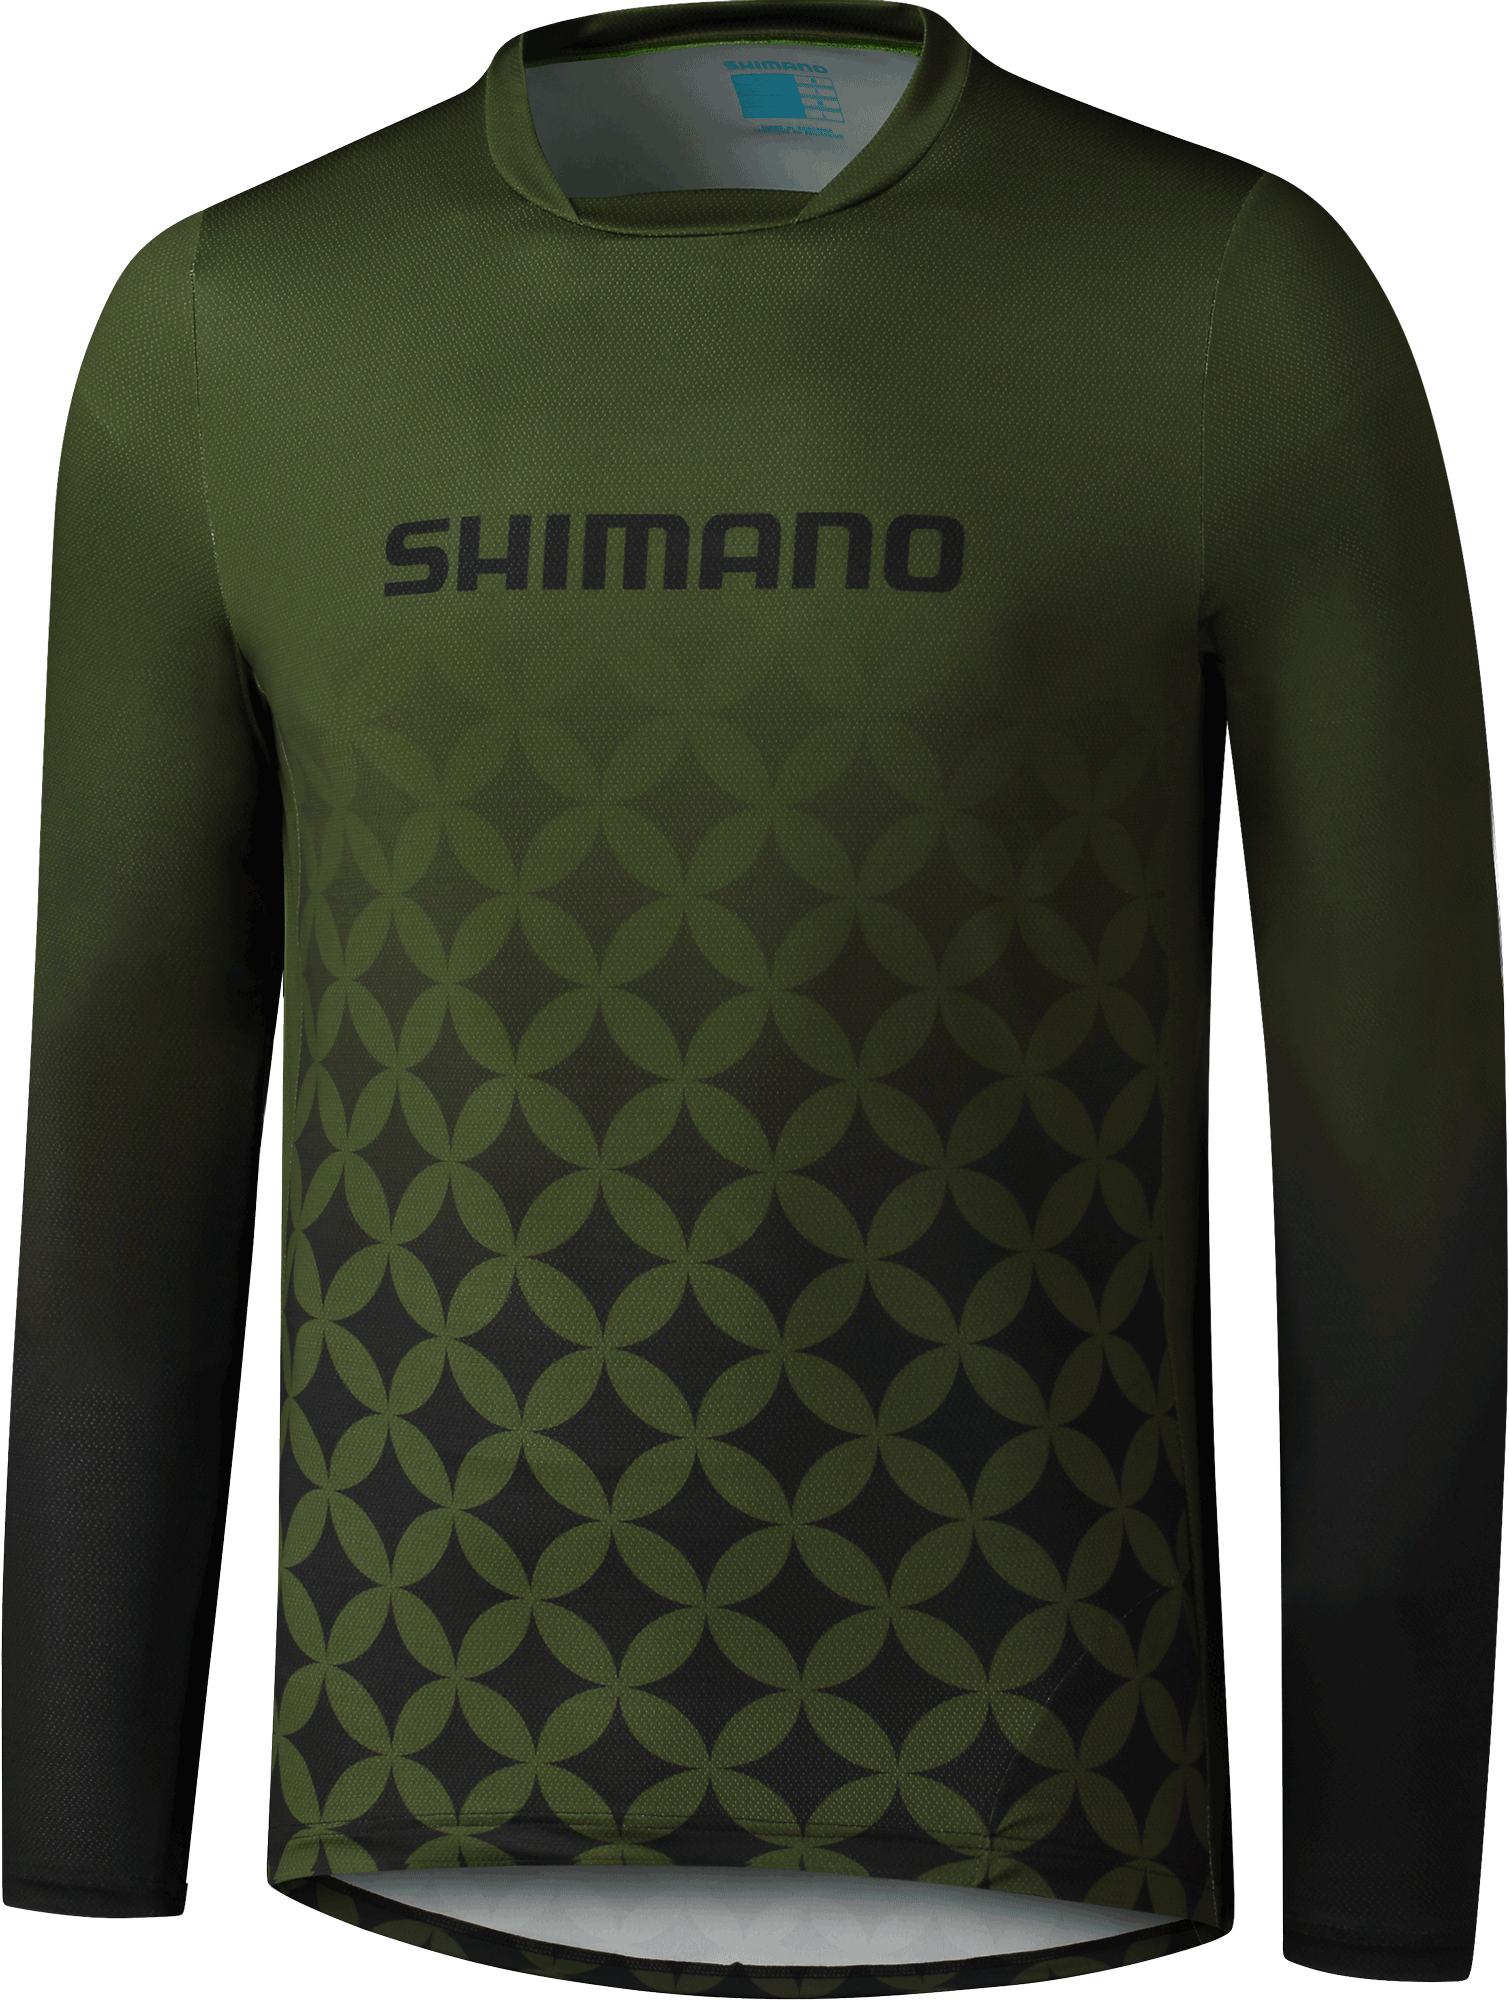 https://mtb.shimano.com/_assets/images/products/softgoods/clothing/myoko-long-sleeve-jersey/cw-jsts-ve12me15-khaki_front.png